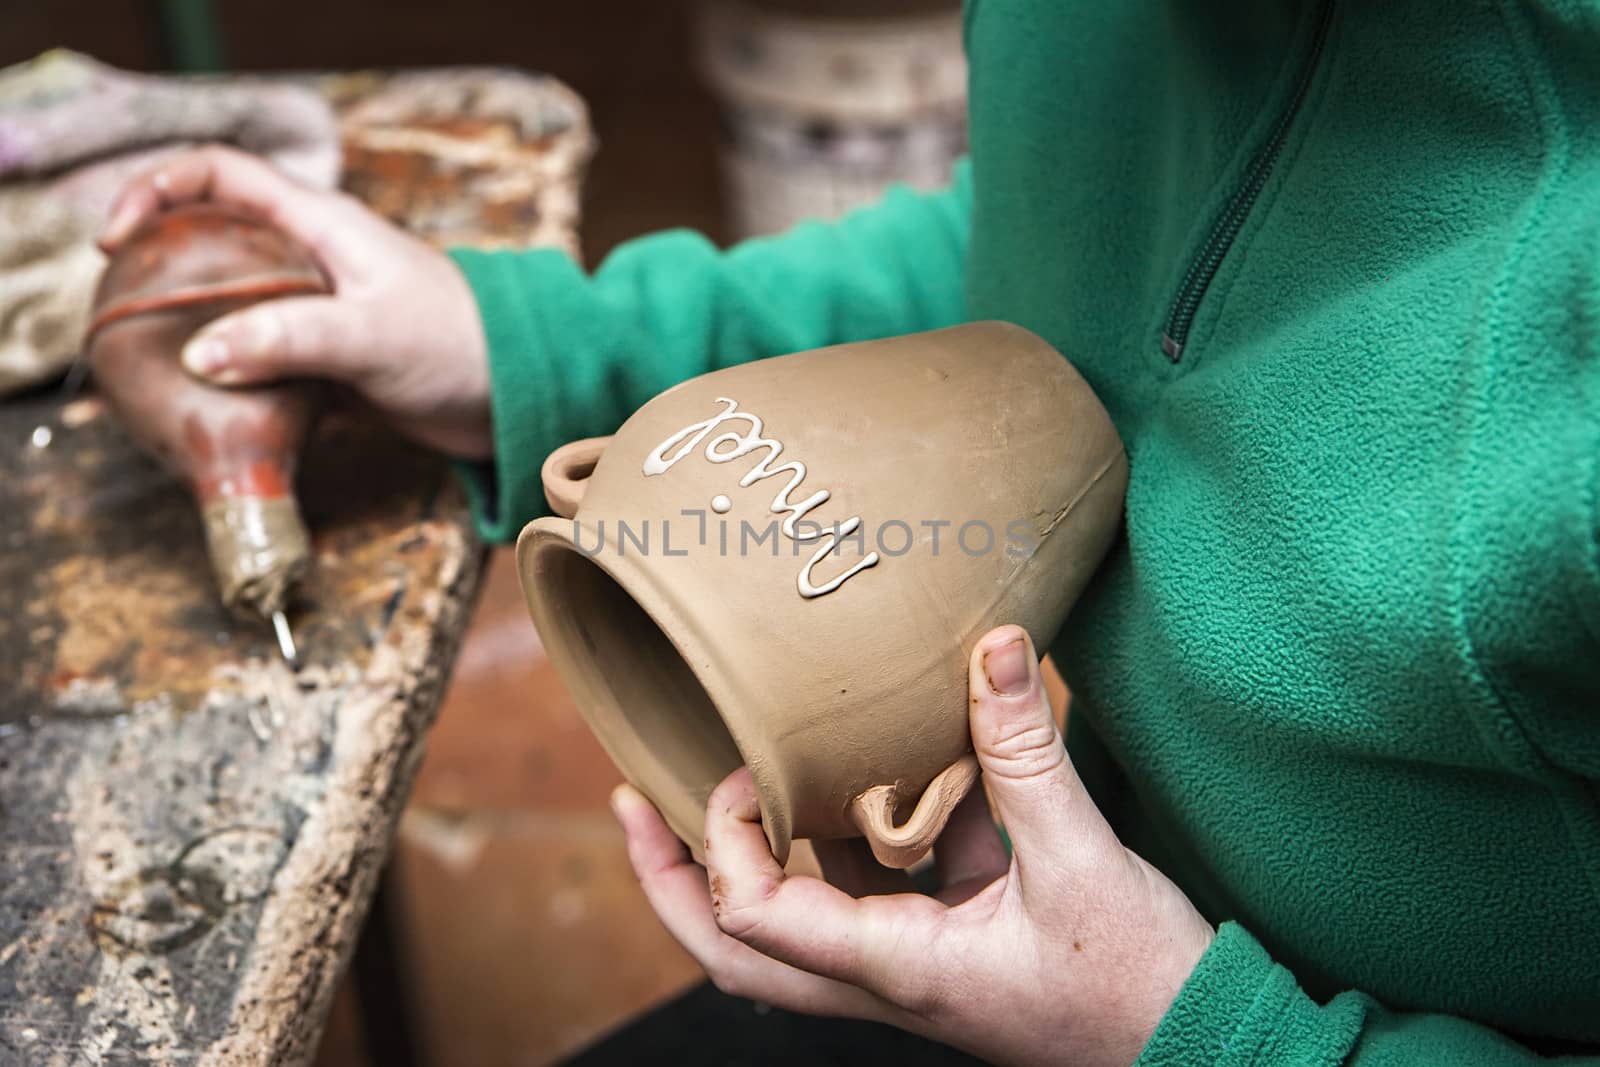 Potter decorating a ceramic jar with the word honey, clay pottery ceramics typical of Bailen, Jaen province, Andalucia, Spain